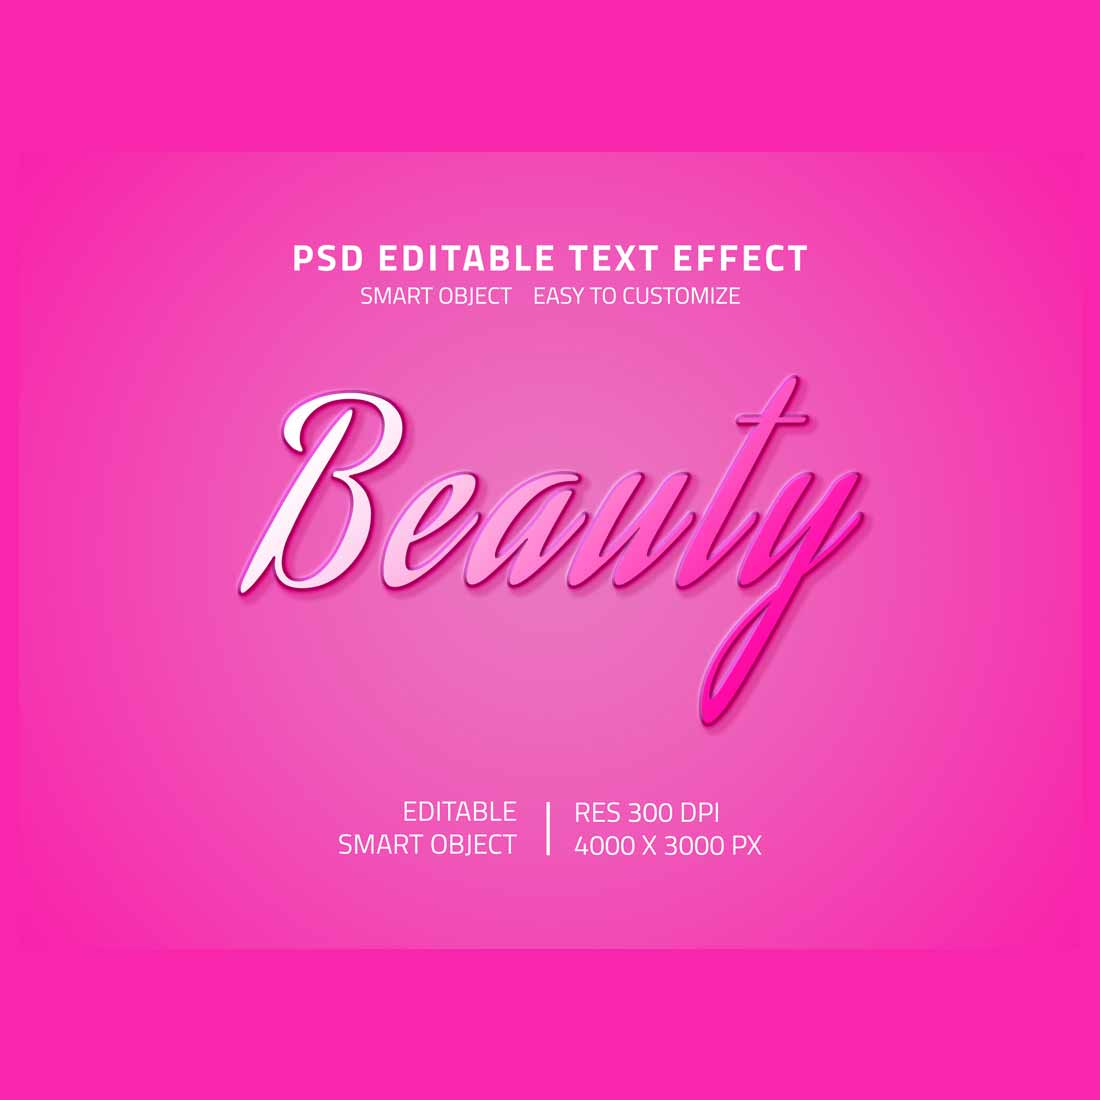 Beauty Editable Psd Text Effect cover image.